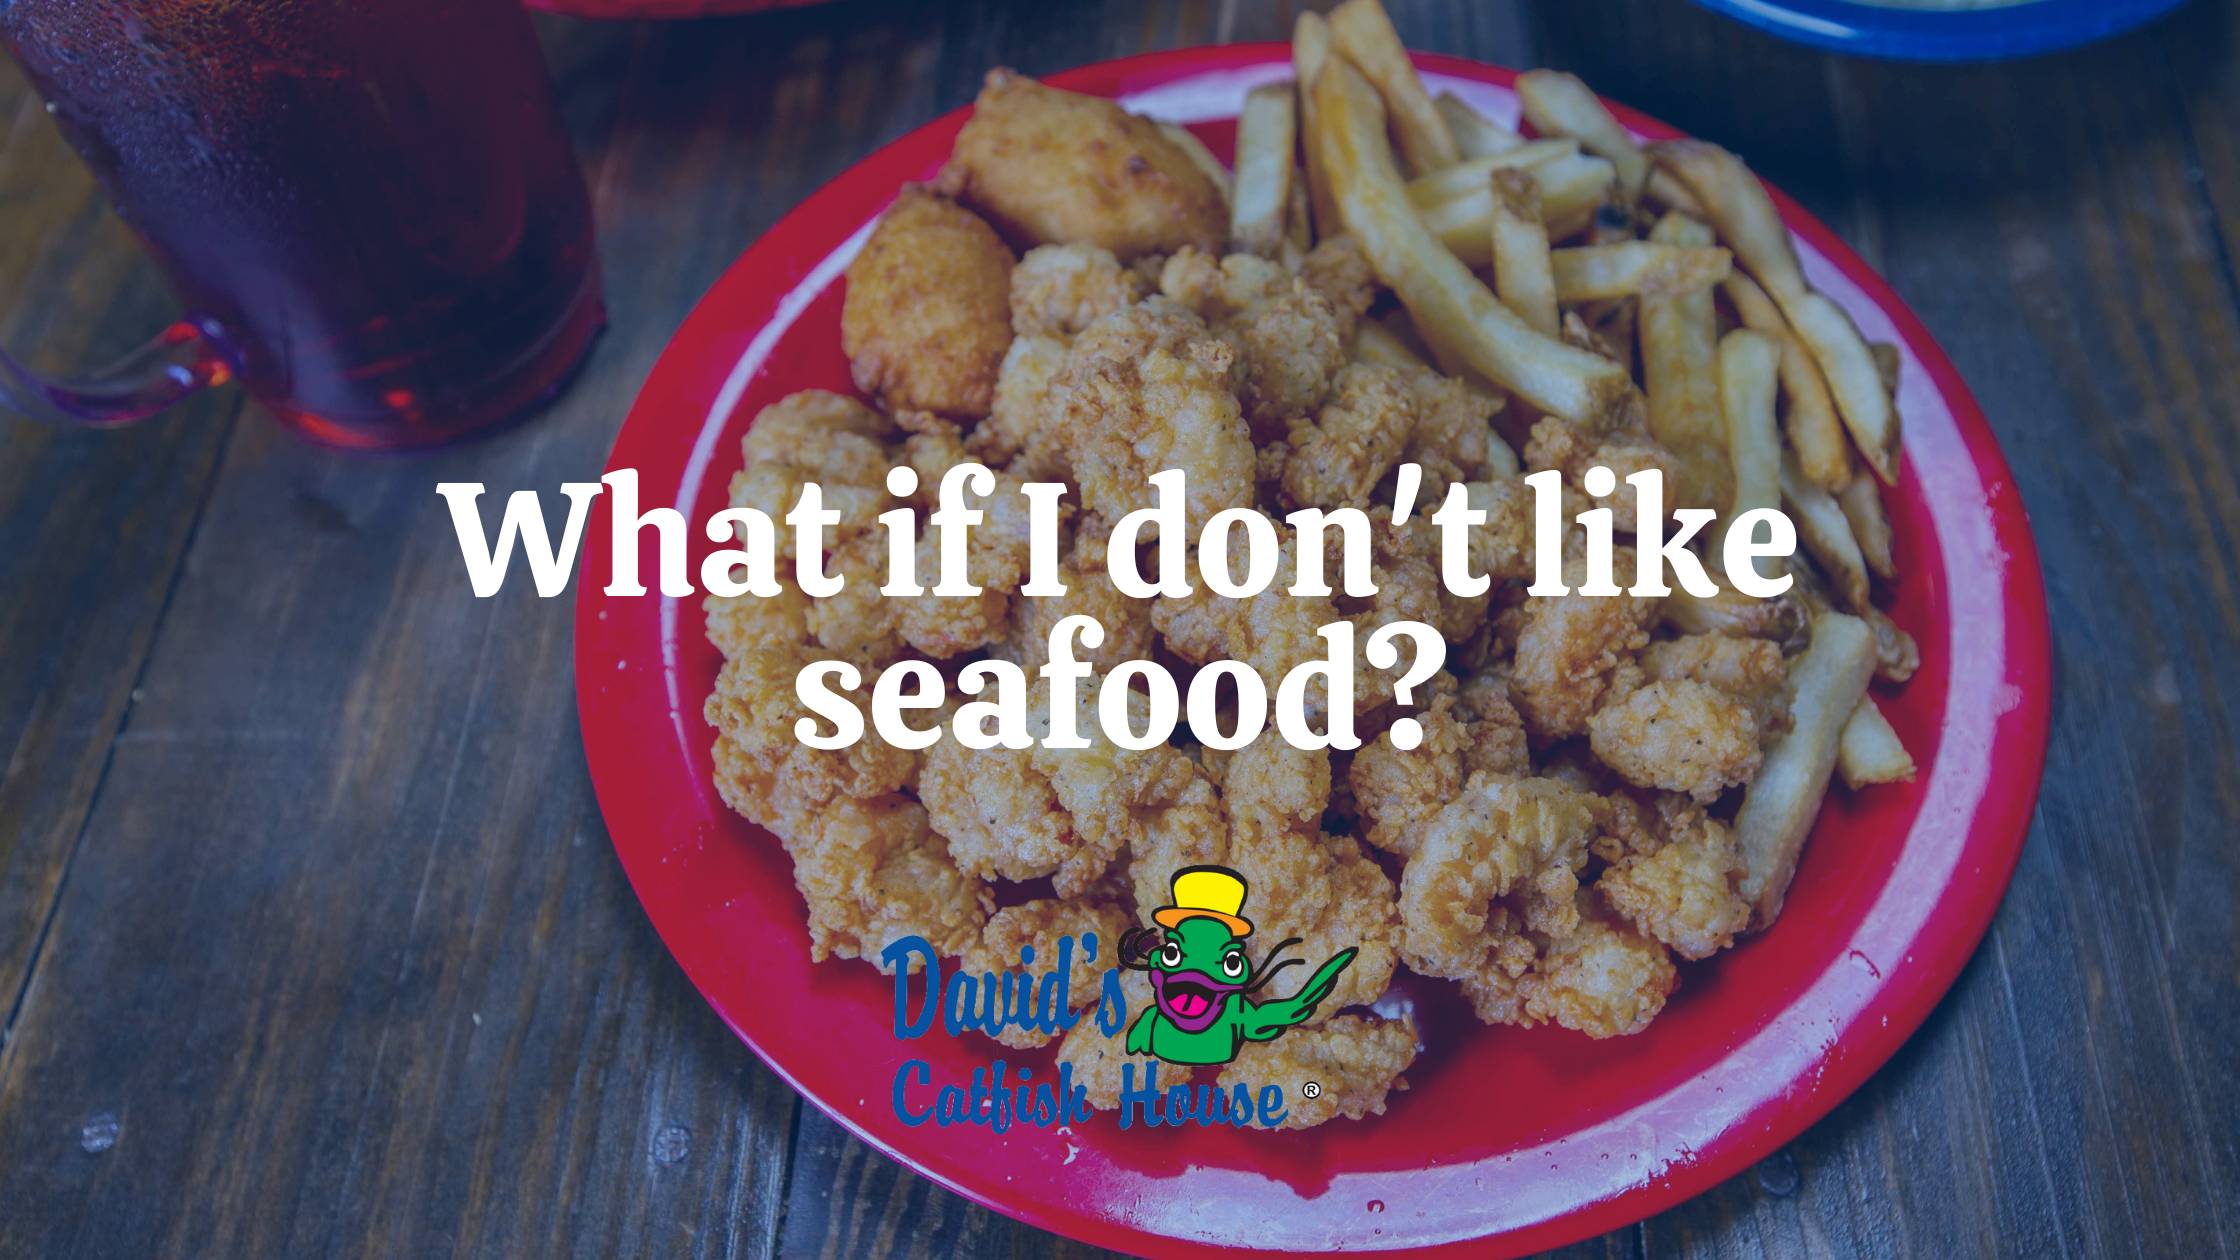 What if I don't like seafood?